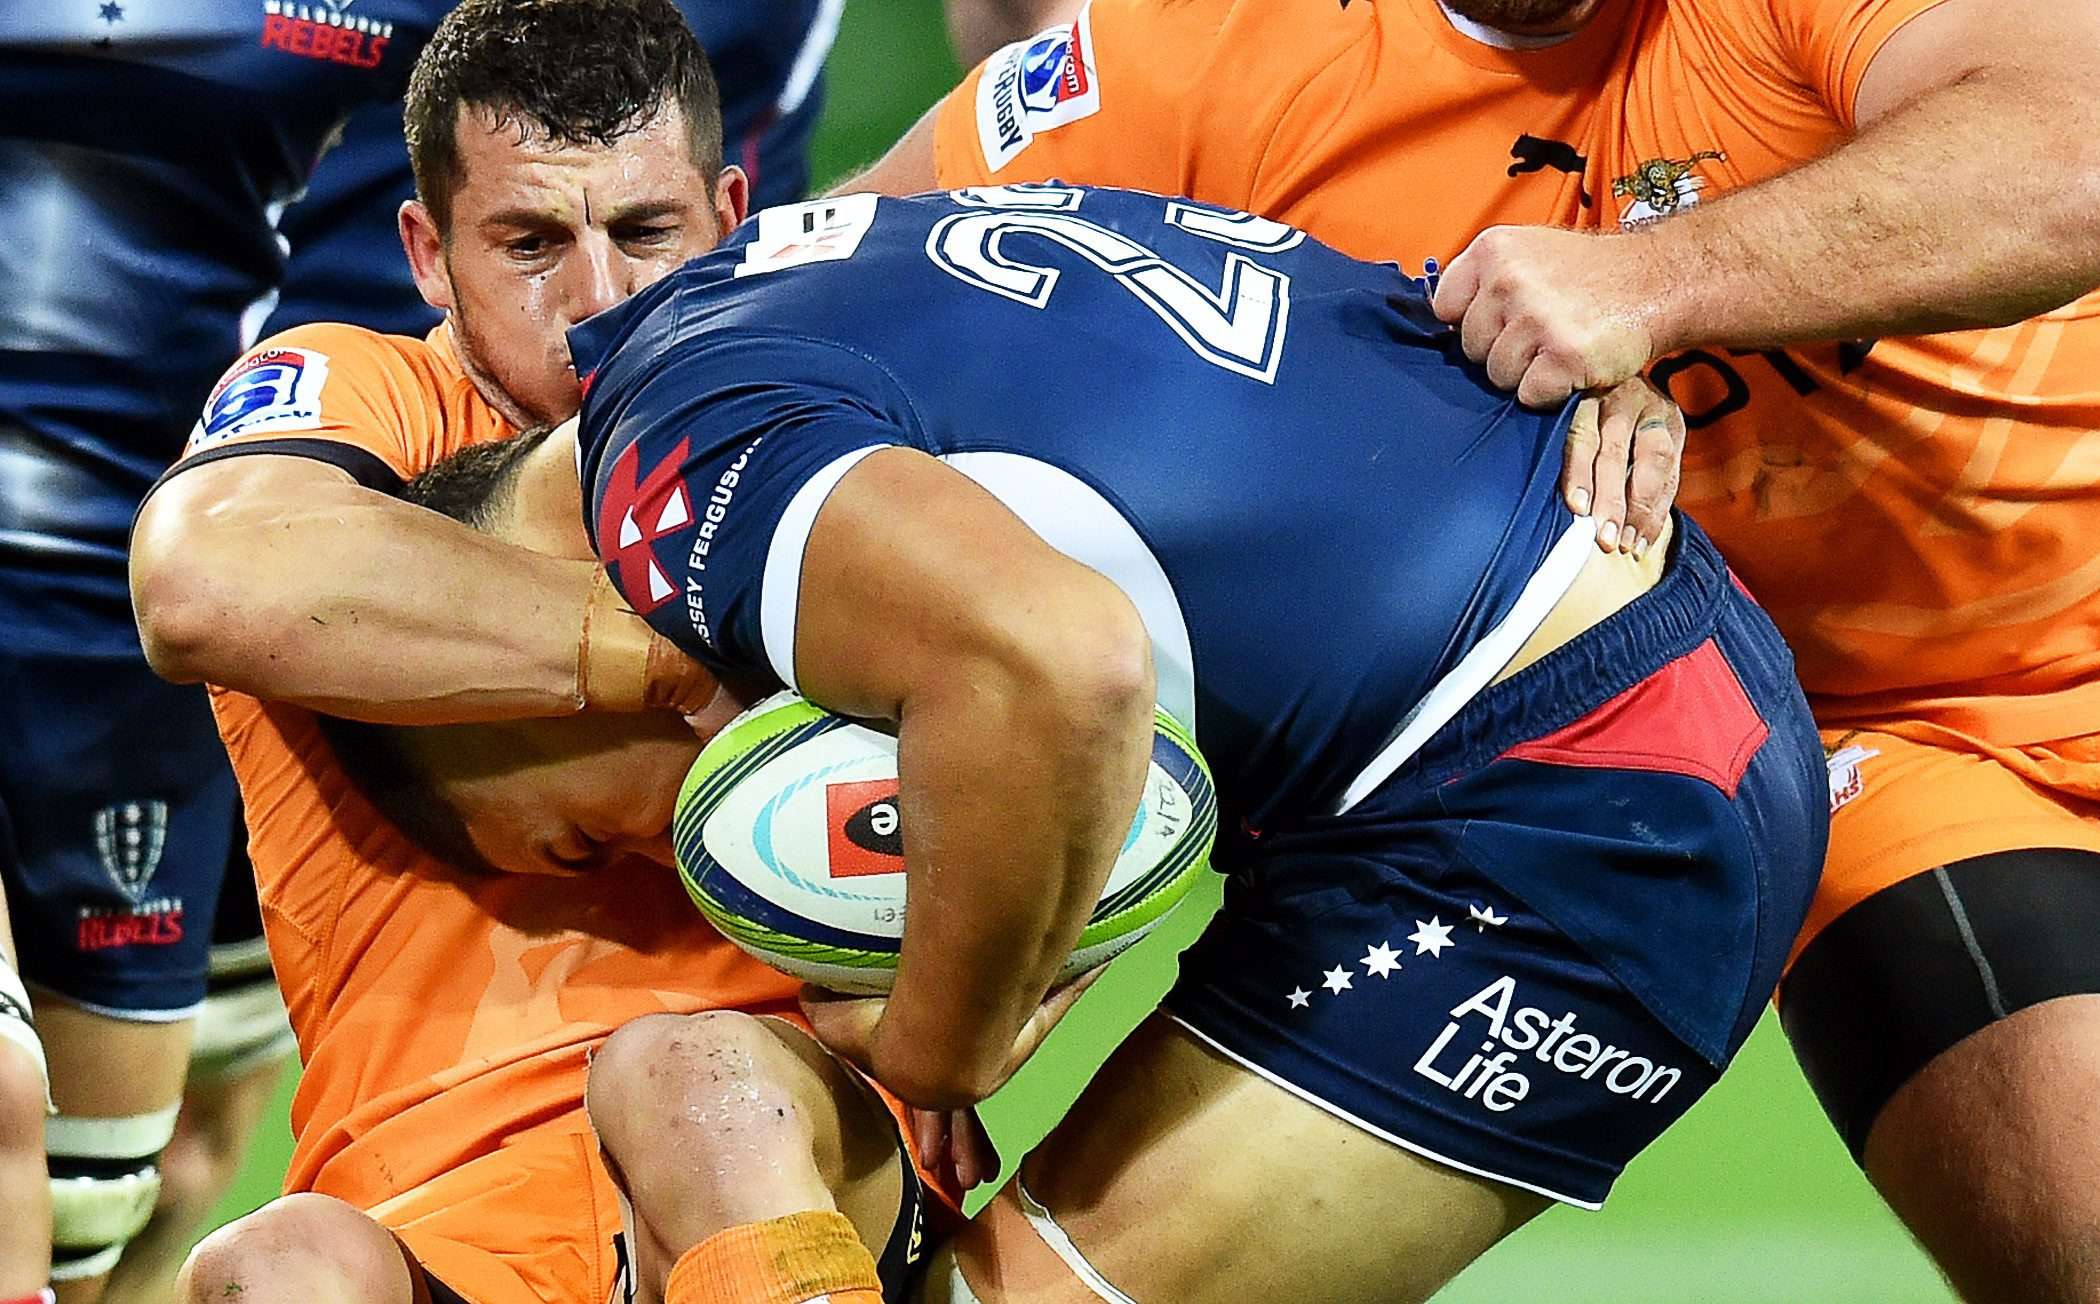 Shaun Venter of the Cheetahs tackles Sione Tuipulotu of the Rebels during their Super Rugby match at AAMI Park in Melbourne on Friday night. Photo: EPA